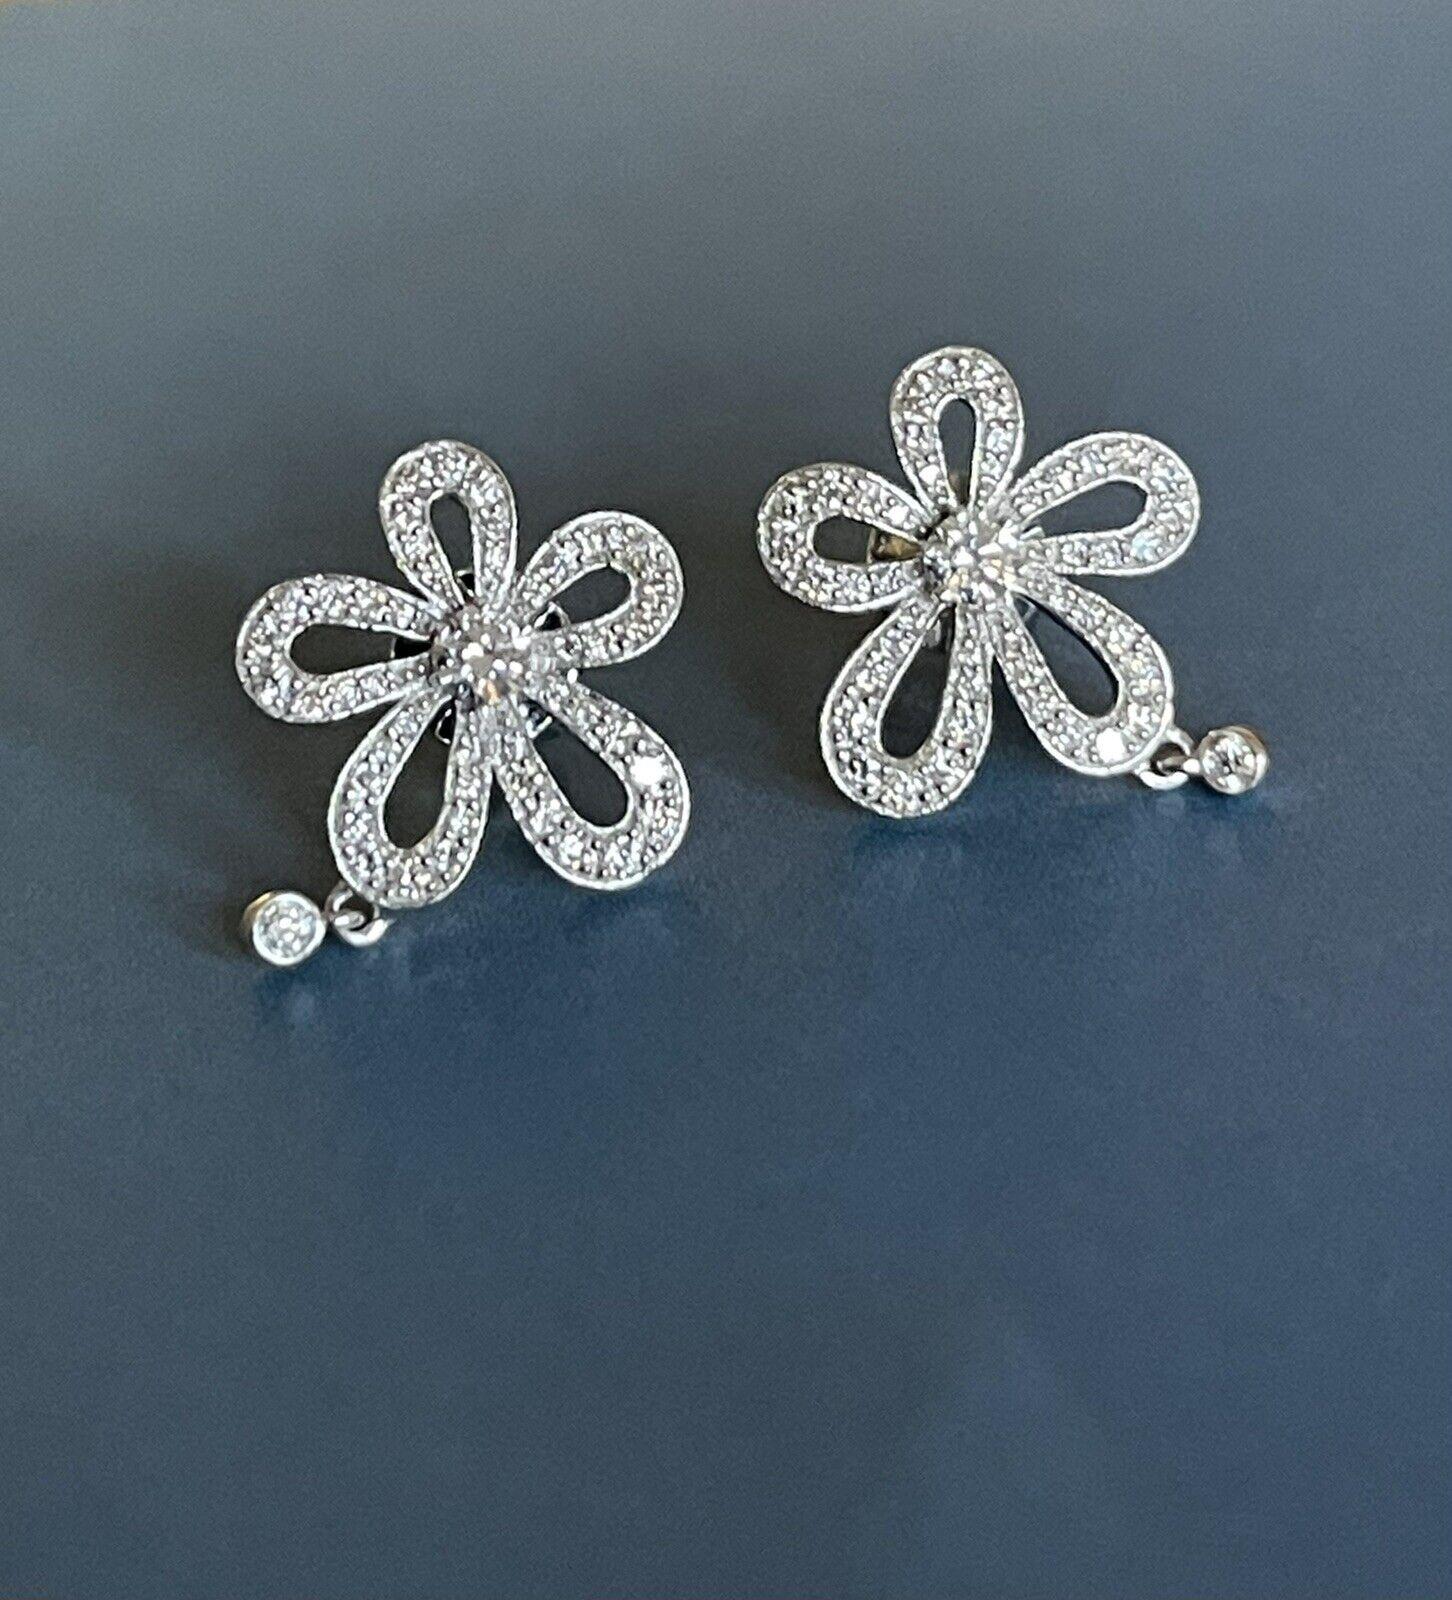 Cervin Blanc 18ct White Gold Diamond Earrings 0.64ct Plumeria Flower Solitaire In New Condition For Sale In Ilford, GB